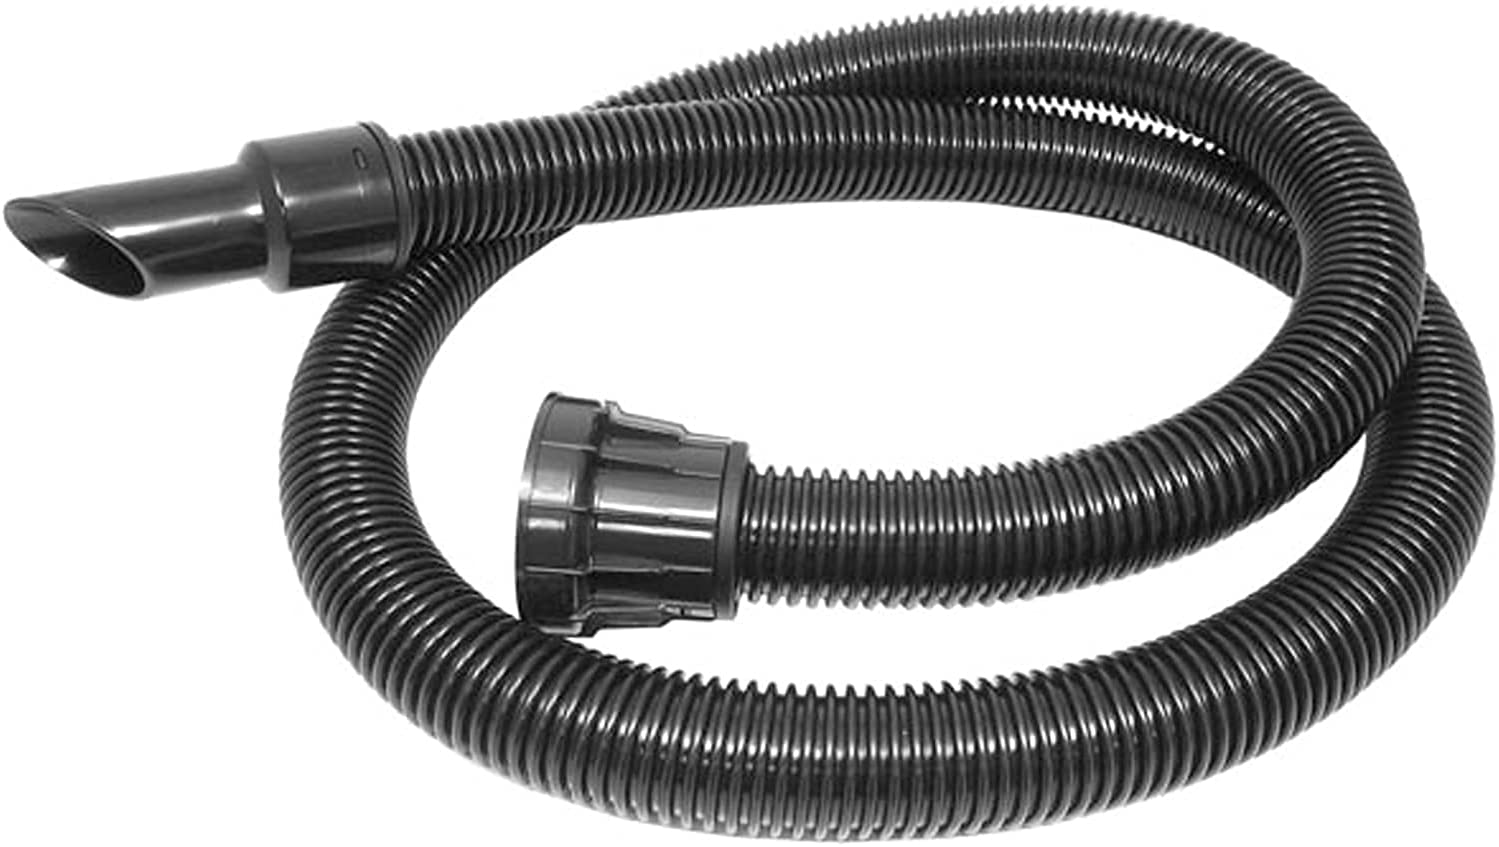 Replacement Henry Hetty Hoover Vacuum Hose 2.5 Metre Pipe Attachment